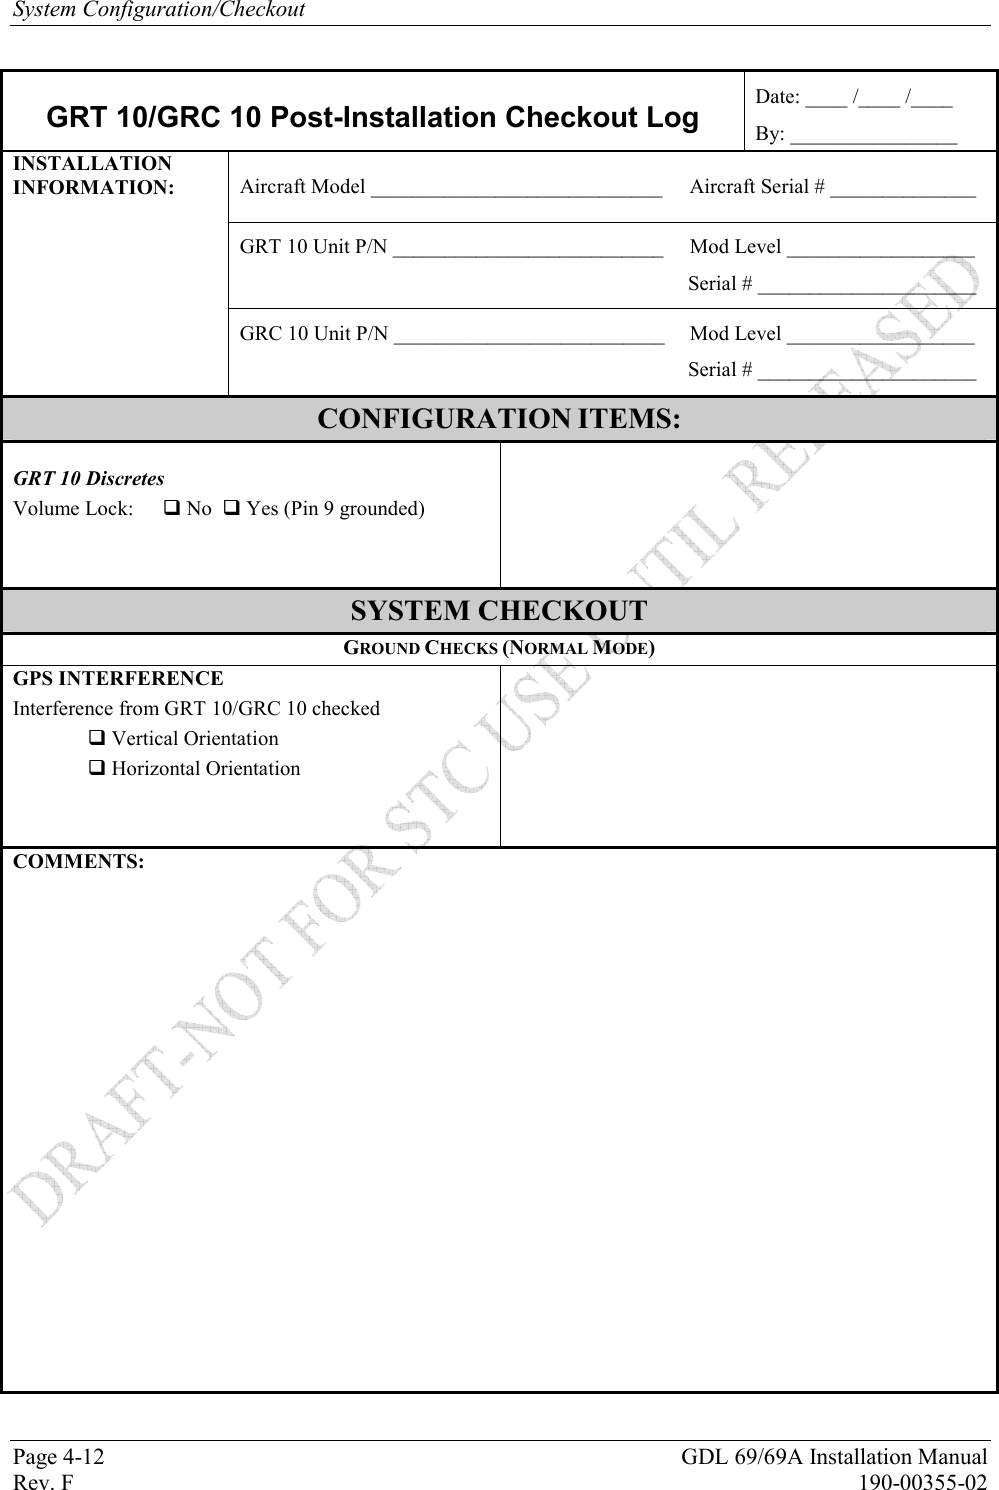 System Configuration/Checkout Page 4-12  GDL 69/69A Installation Manual Rev. F  190-00355-02  GRT 10/GRC 10 Post-Installation Checkout Log Date: ____ /____ /____ By: ________________ Aircraft Model ____________________________  Aircraft Serial # ______________ GRT 10 Unit P/N __________________________  Mod Level __________________ Serial # _____________________ INSTALLATION INFORMATION: GRC 10 Unit P/N __________________________  Mod Level __________________ Serial # _____________________ CONFIGURATION ITEMS:   GRT 10 Discretes  Volume Lock:    No   Yes (Pin 9 grounded)        SYSTEM CHECKOUT GROUND CHECKS (NORMAL MODE) GPS INTERFERENCE  Interference from GRT 10/GRC 10 checked    Vertical Orientation    Horizontal Orientation       COMMENTS:     